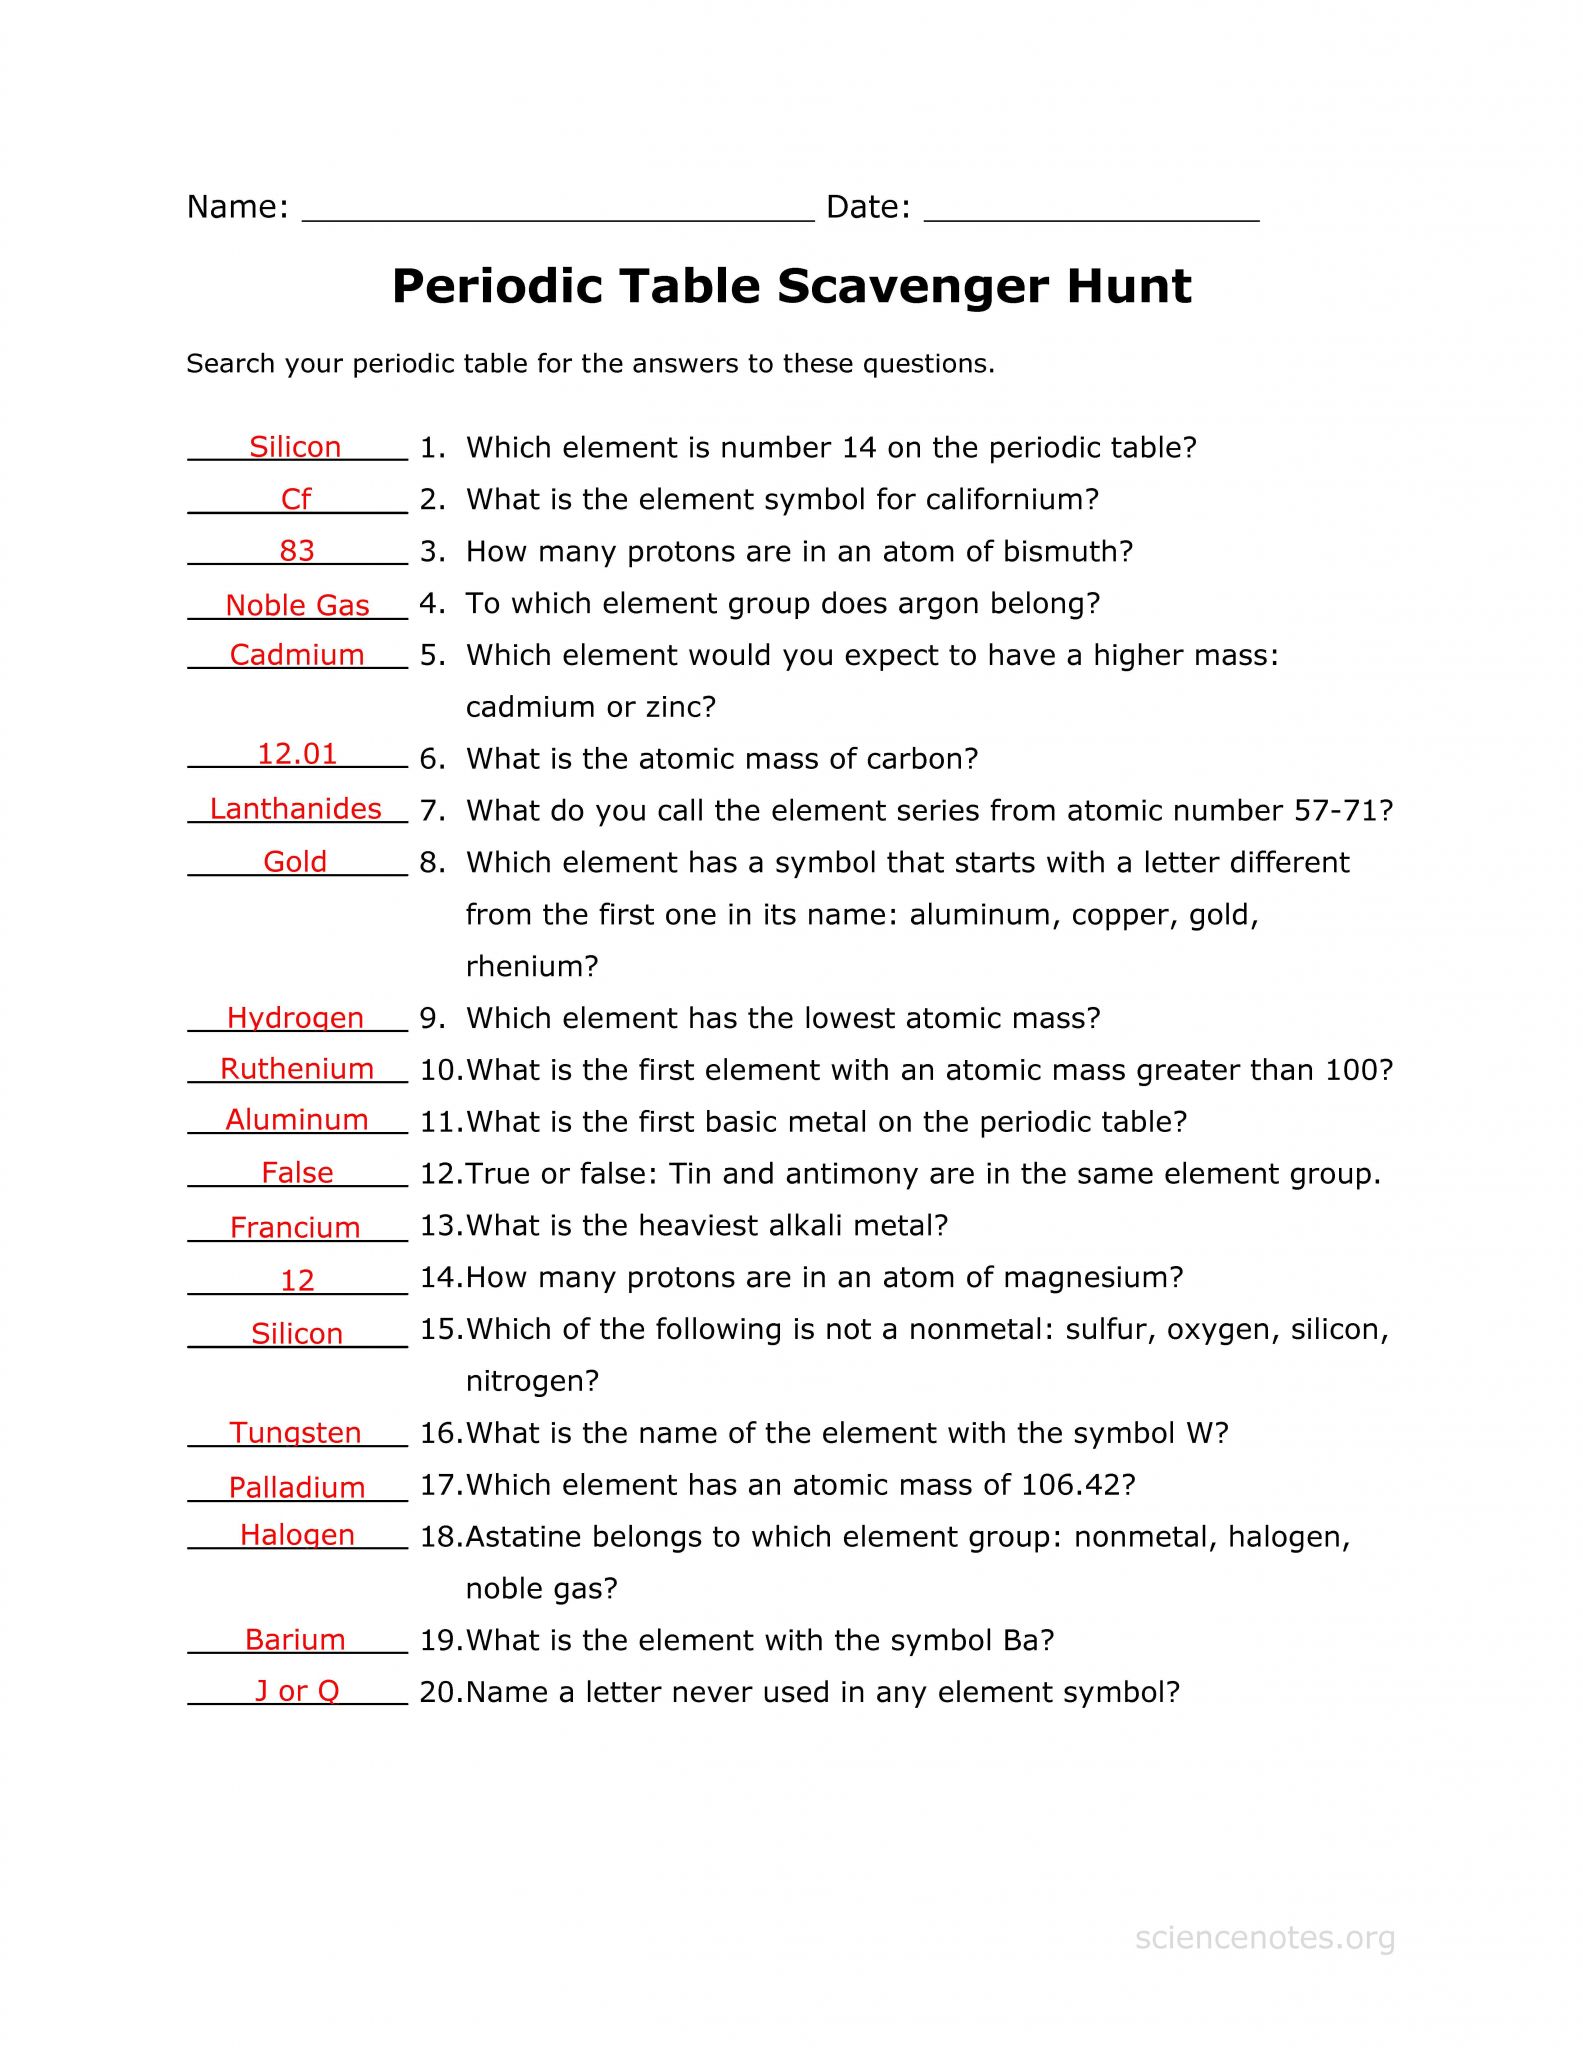 Conservation Of Energy Worksheet Answers or Answer Key to the Periodic Table Scavenger Hunt Worksheet Related